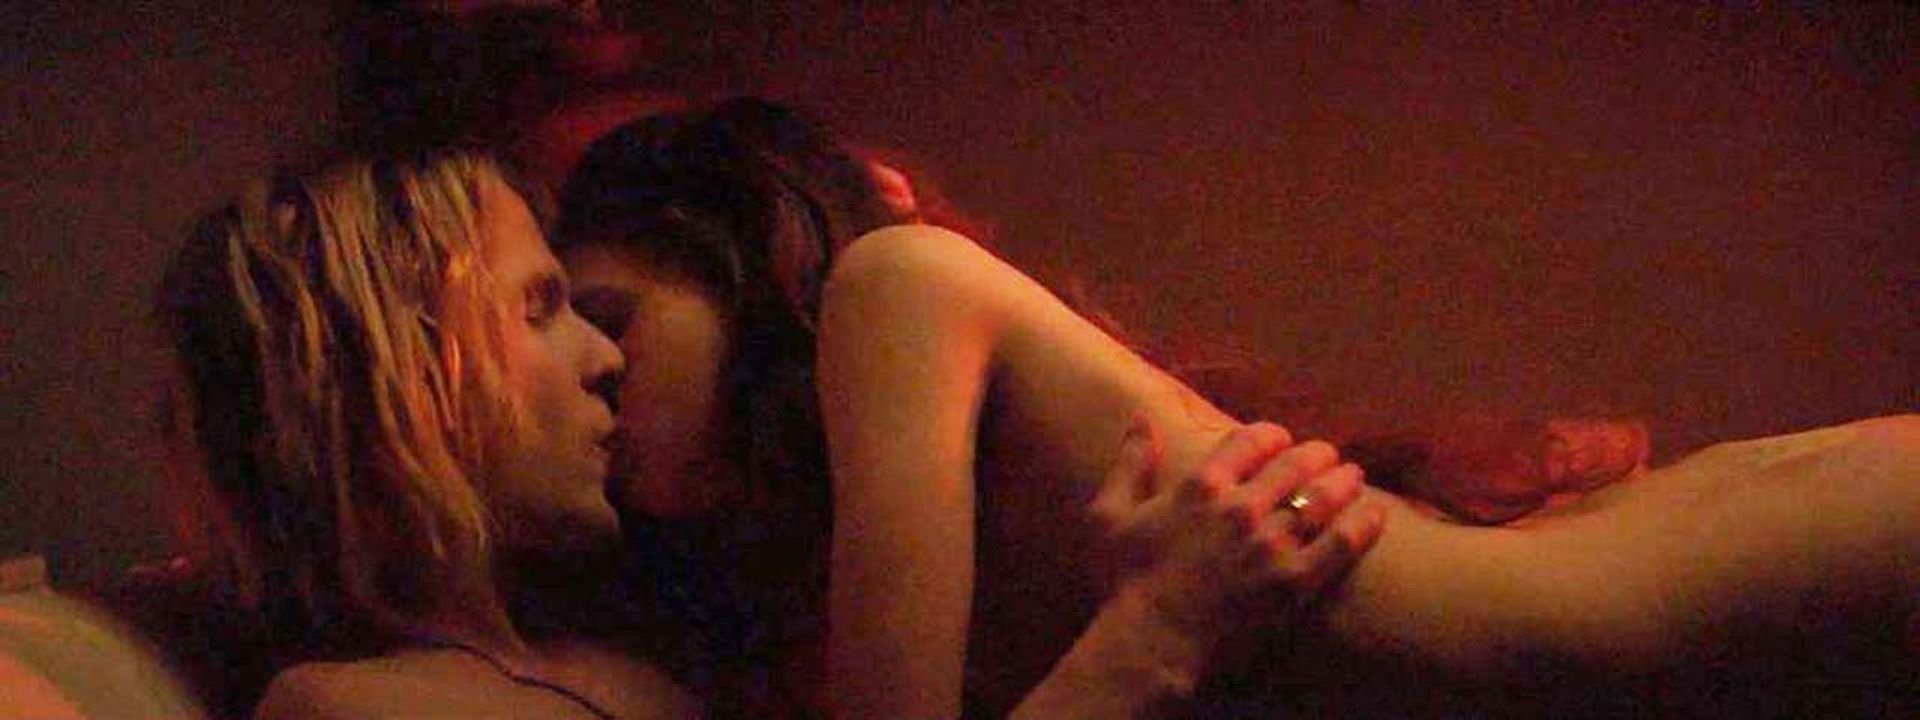 Watch new India Eisley’s nude sex scene from "Adolescence" (2018)...